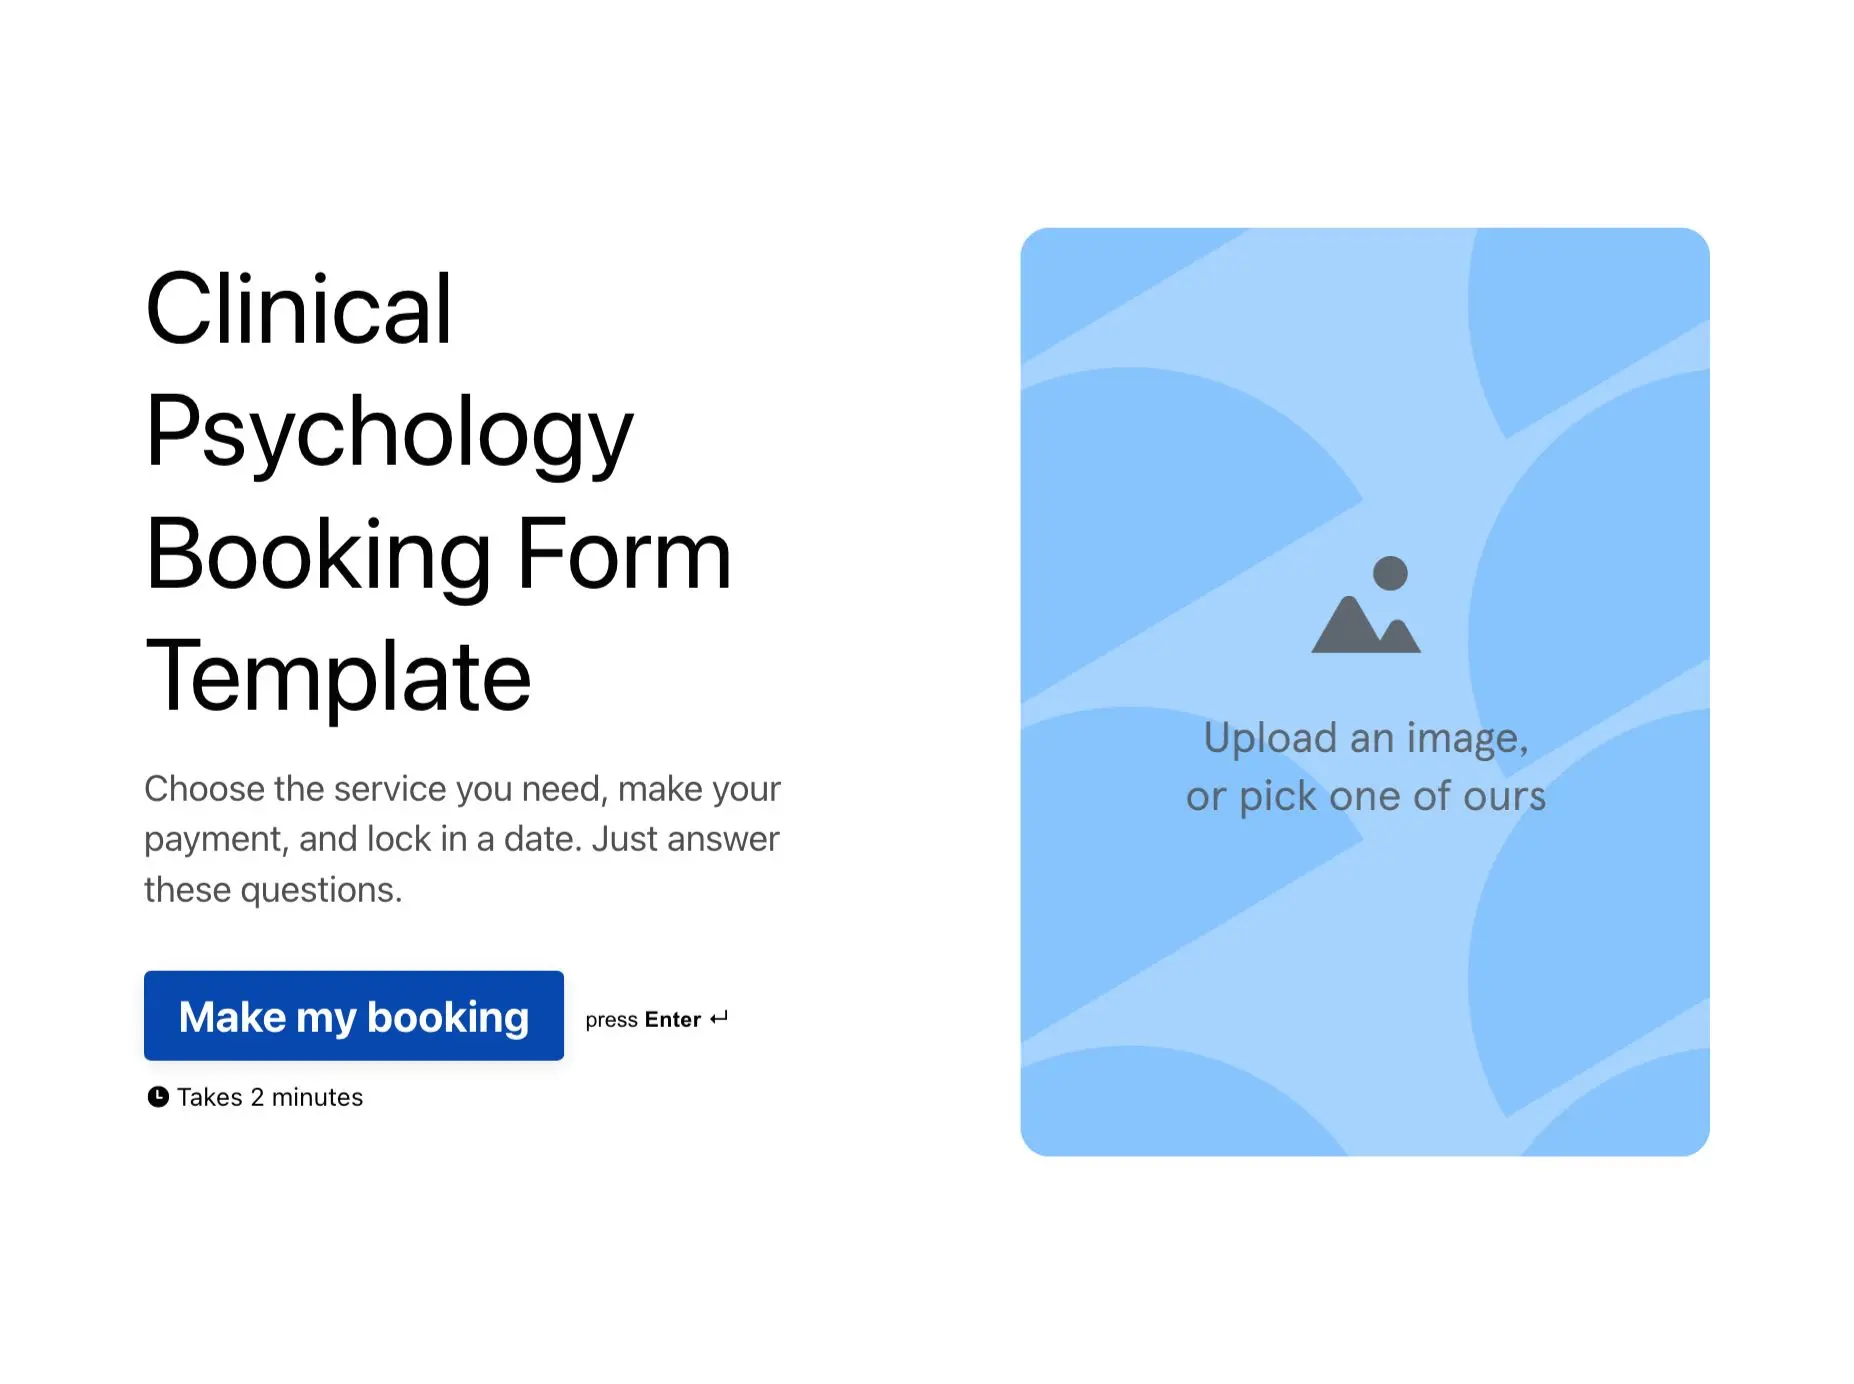 Clinical Psychology Booking Form Template Hero